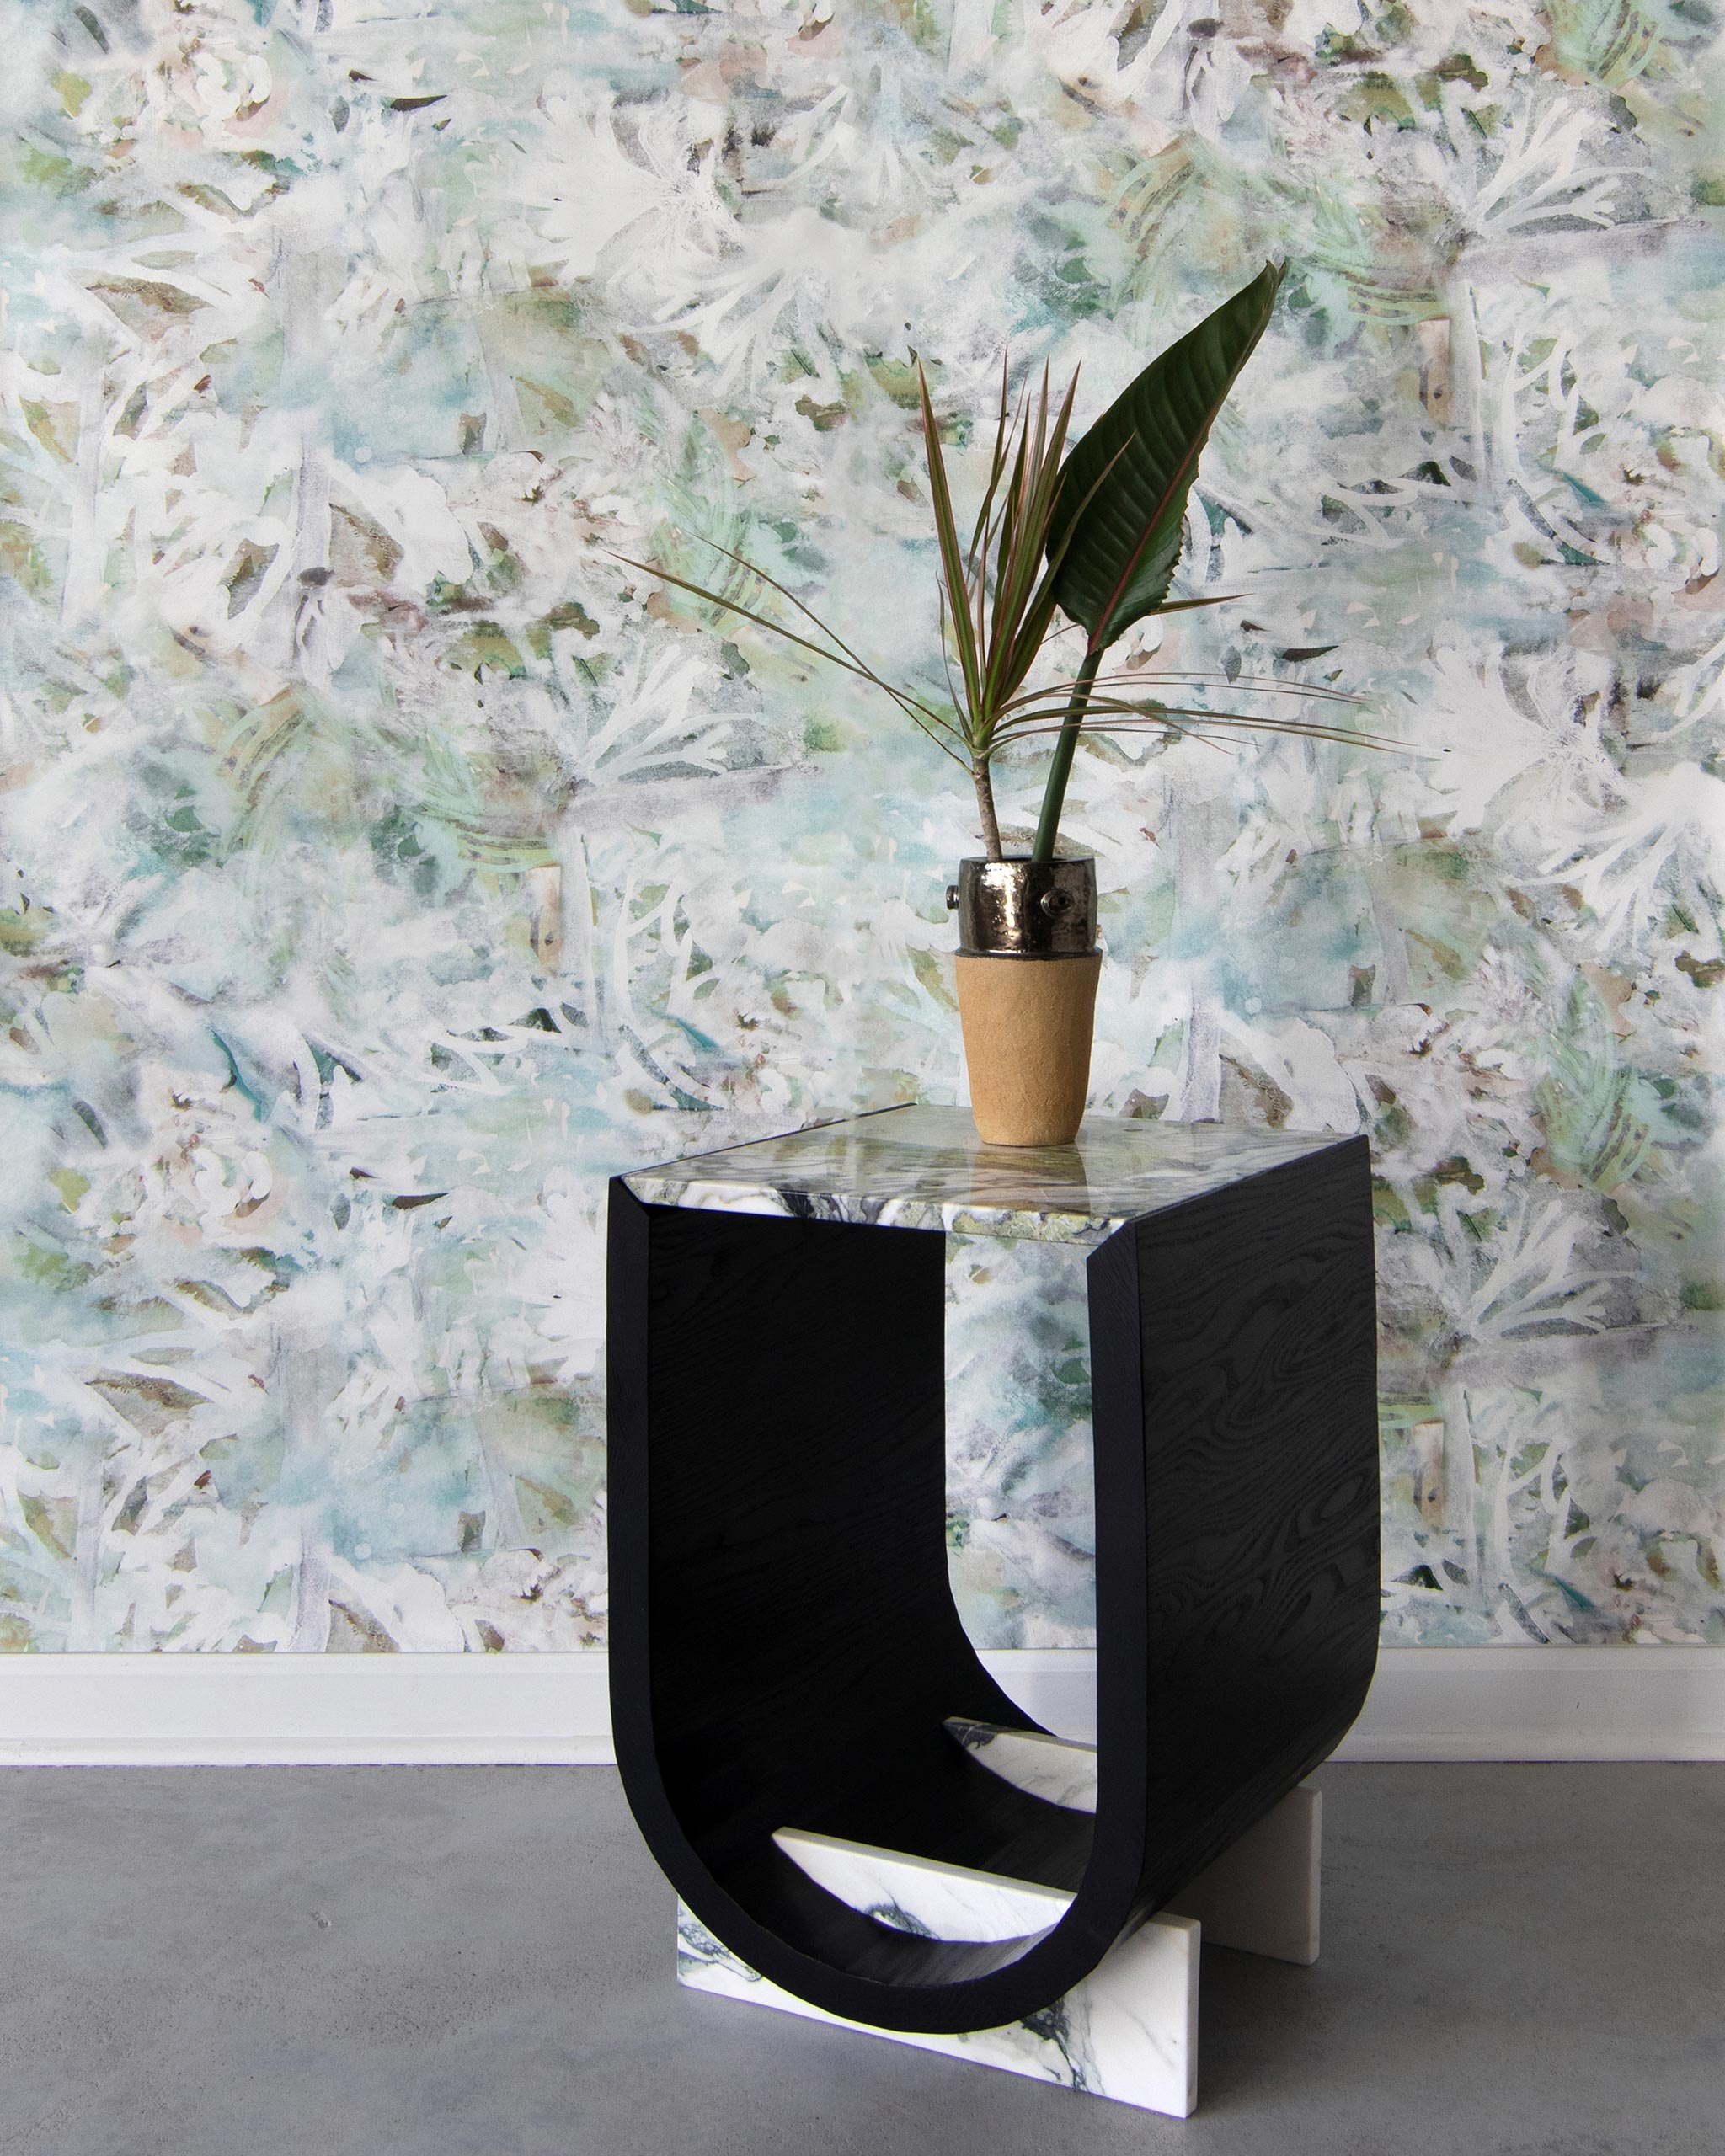 A modernist end table and plant stands in front of a wall papered in an abstract painted print in green, tan and white.